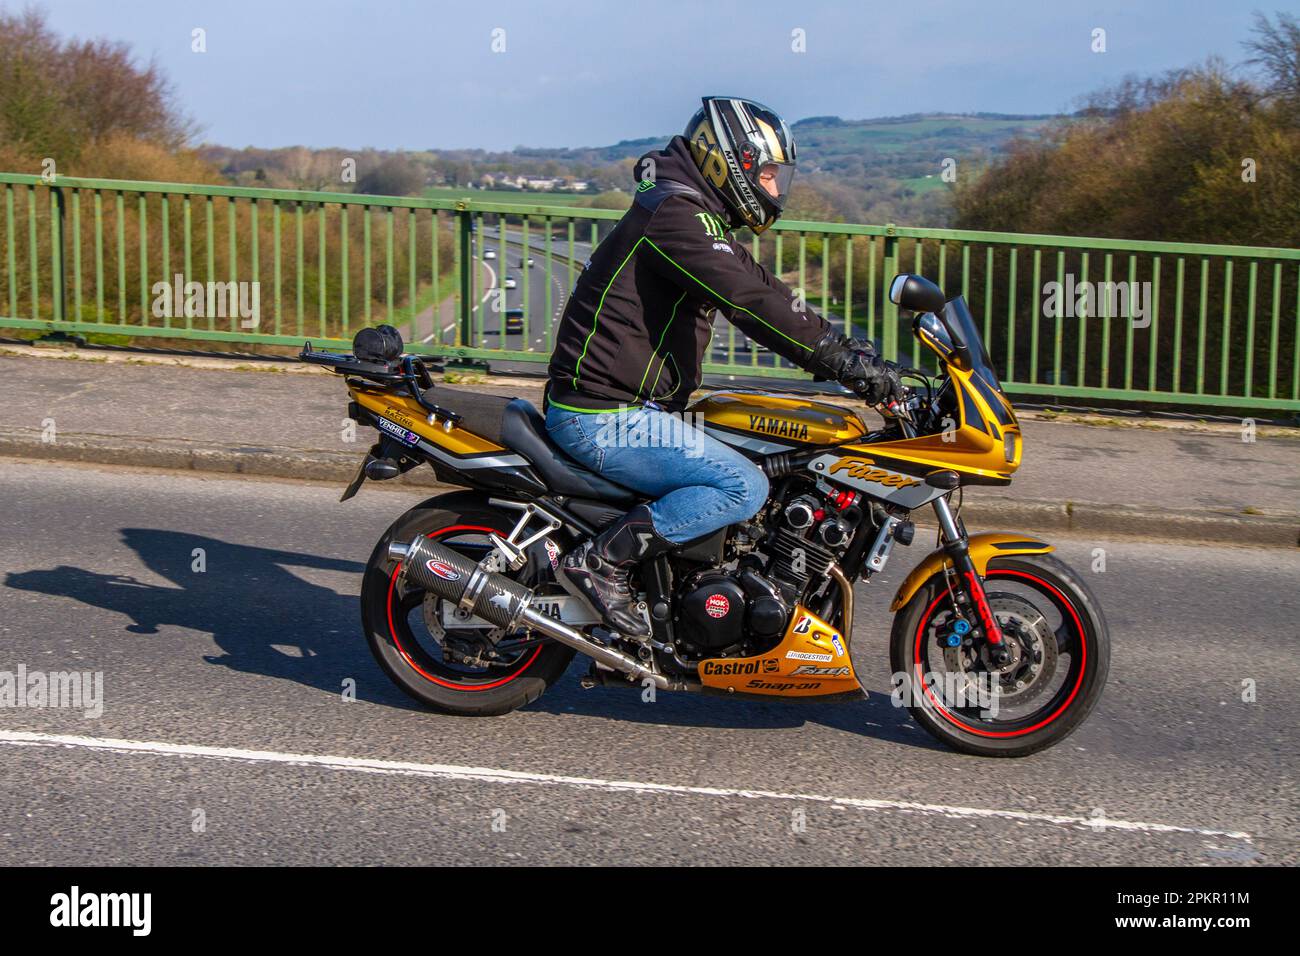 2002 Gold Yamaha Fzs 600 Inline Four, Sports Petrol 599 cc; crossing motorway bridge in Greater Manchester, UK Stock Photo